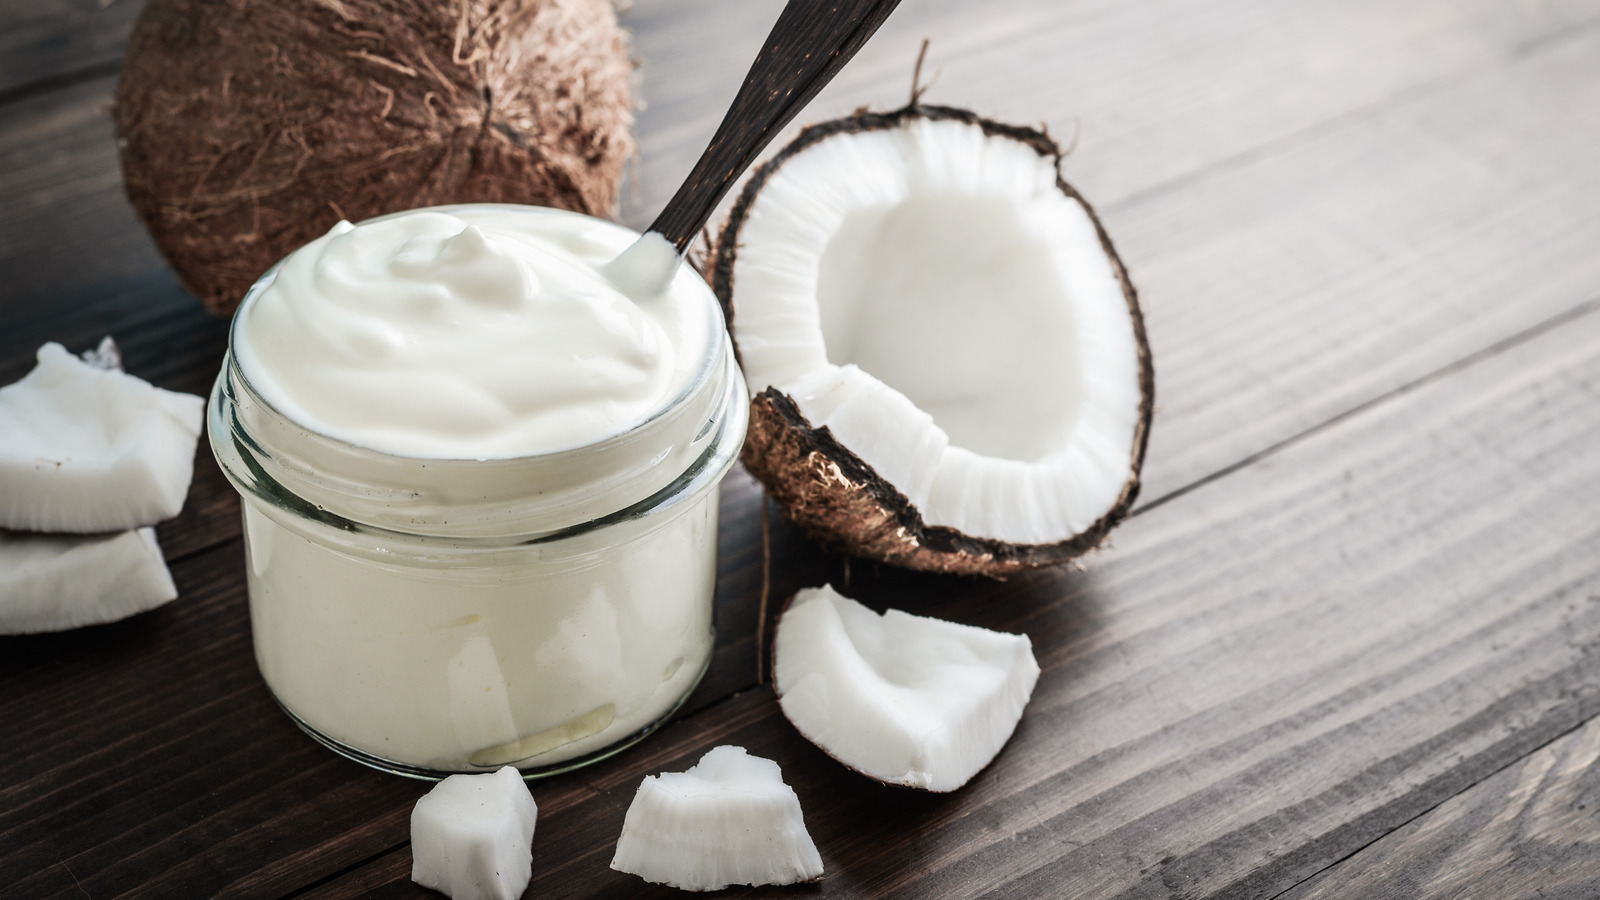 What Is Cream of Coconut?